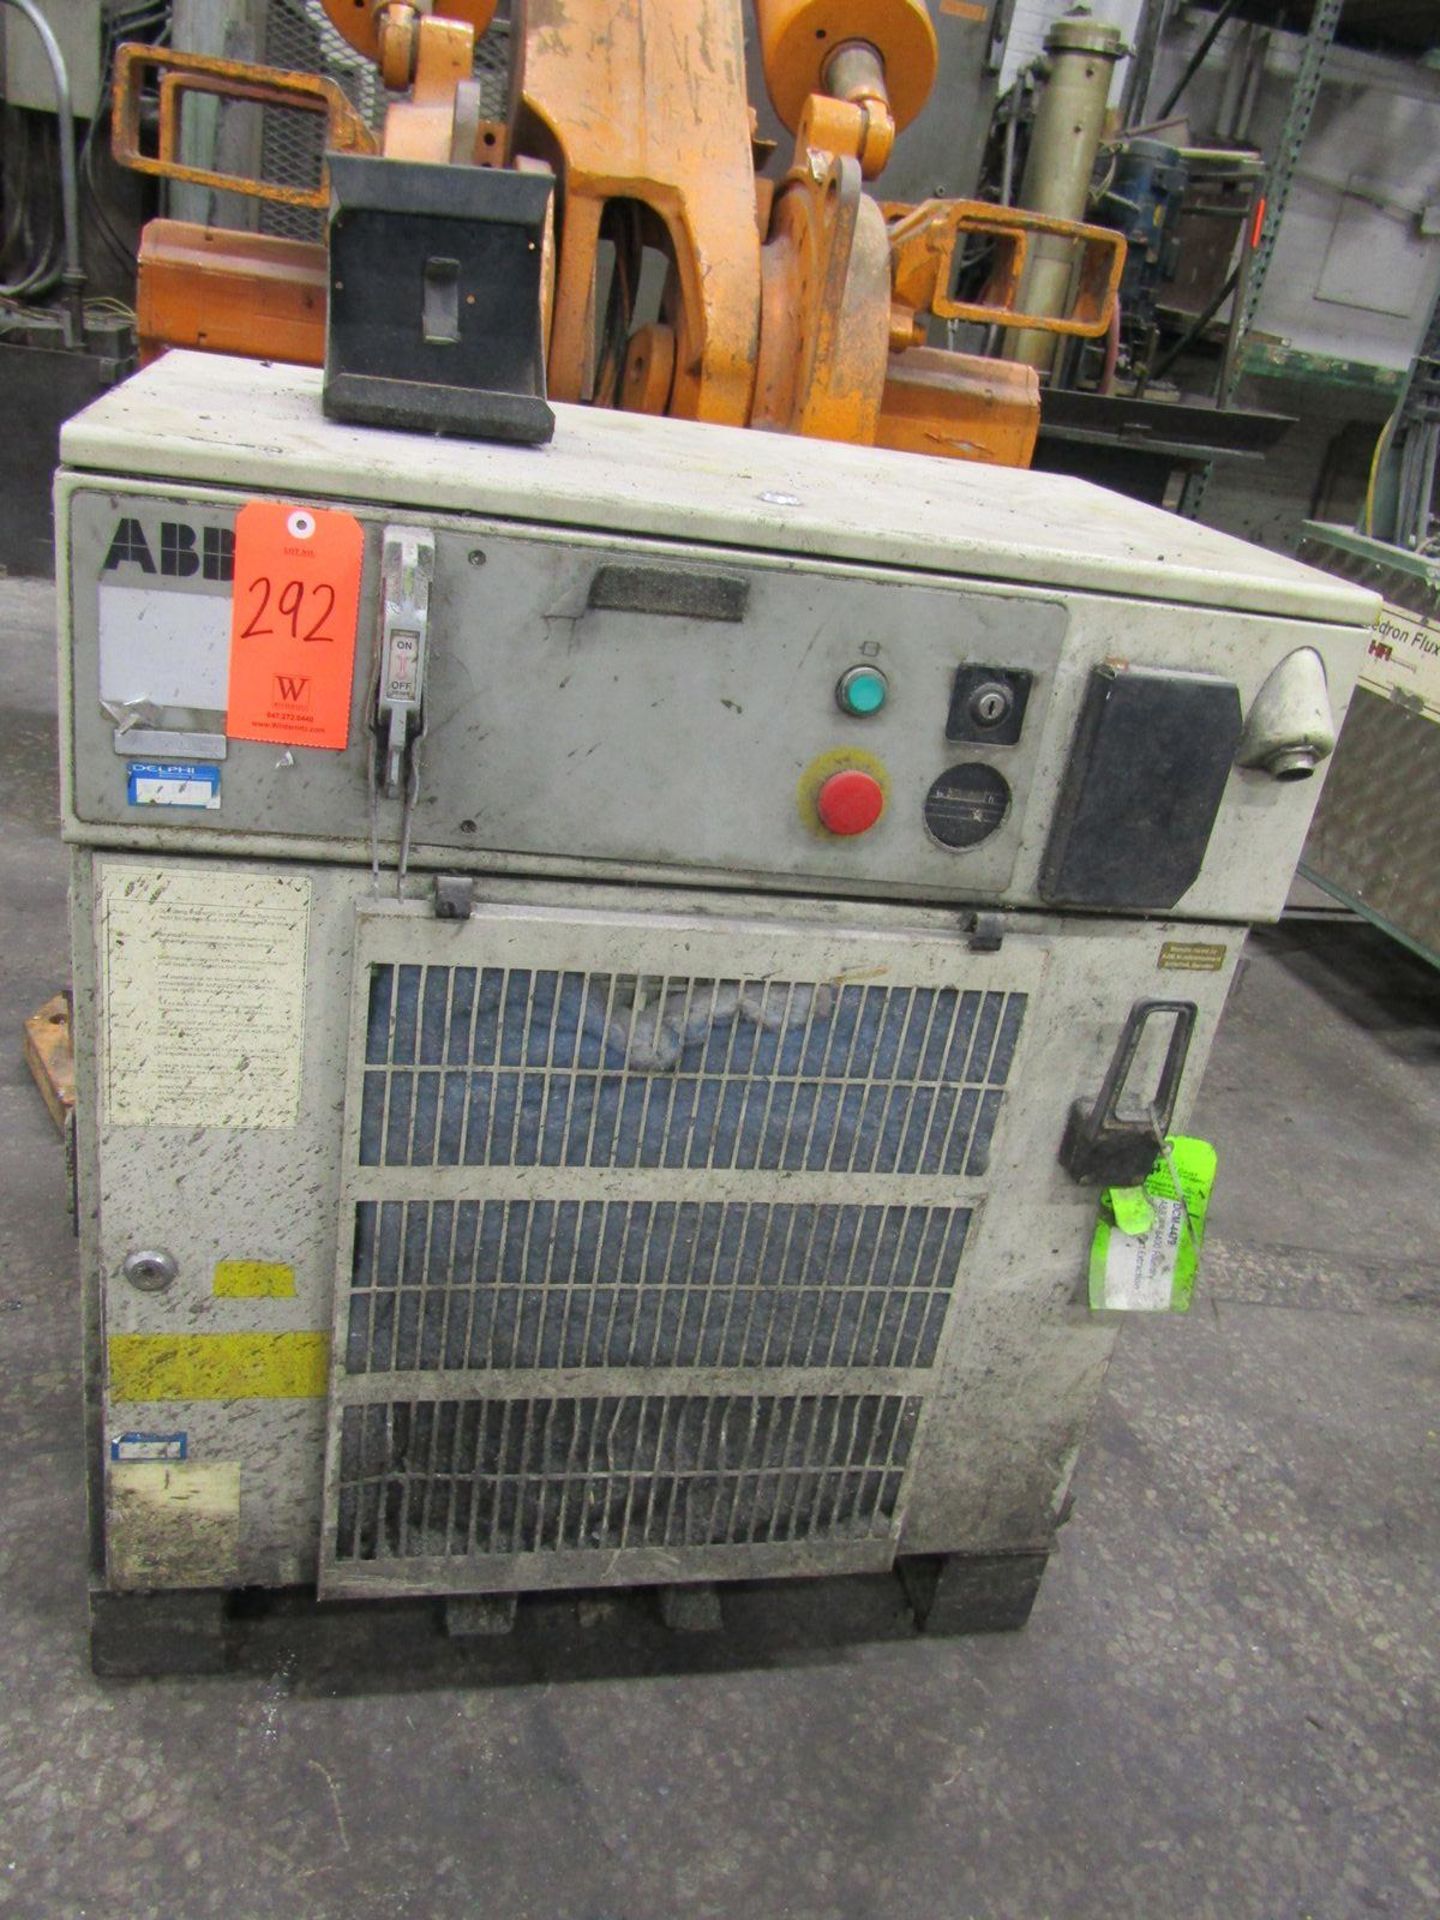 ABB Model IRB 6400 Foundry Robot; with Controller (Ref. #: DC-8-2) - Image 3 of 3